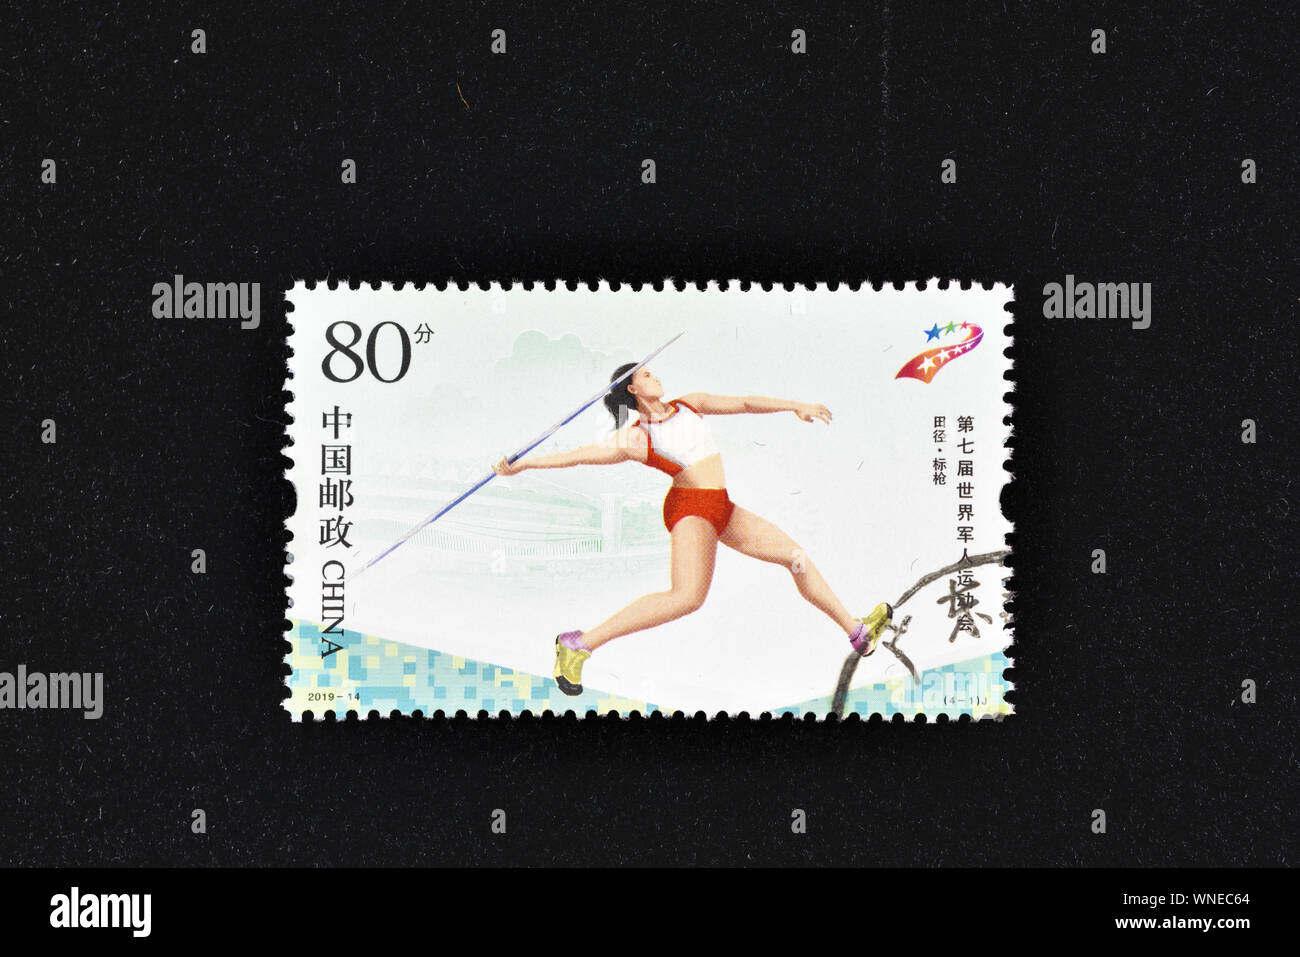 CHINA - CIRCA 2019: A stamps printed in China shows 2019-14 7th CISM Military World Games (Wuhan 2019) (4-1), Javelin - Track & Field circa 2019. Stock Photo